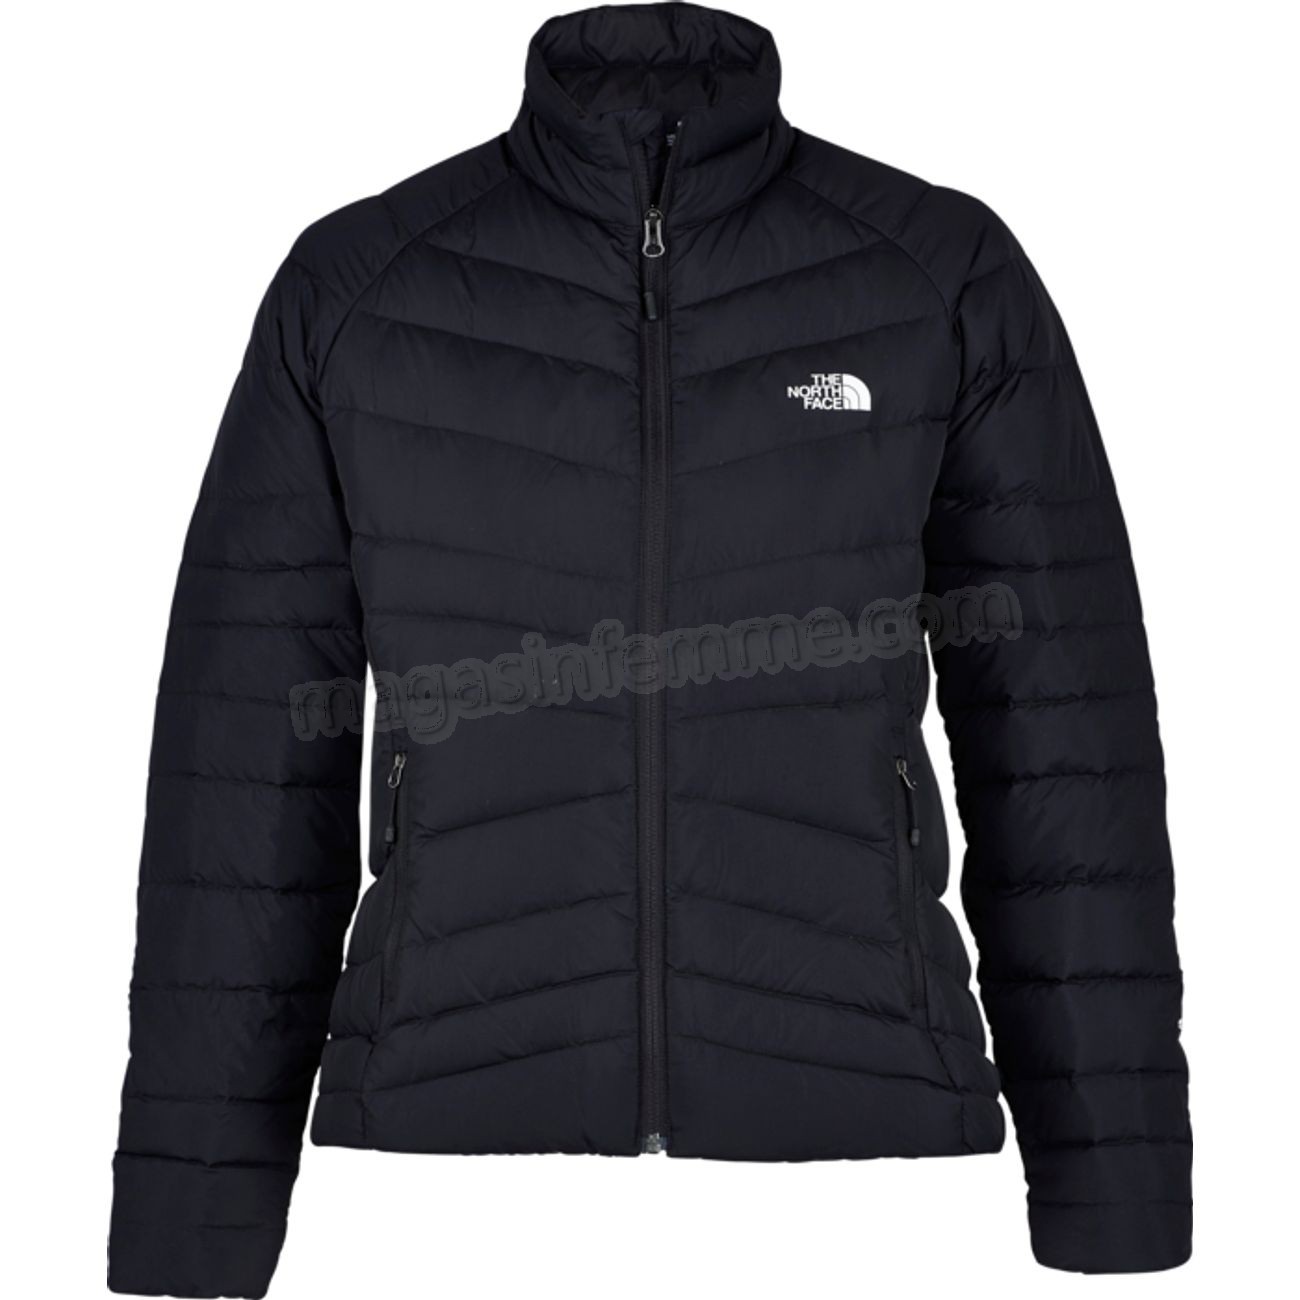 The North Face-VESTE femme THE NORTH FACE COMBAL DOWN en solde - The North Face-VESTE femme THE NORTH FACE COMBAL DOWN en solde